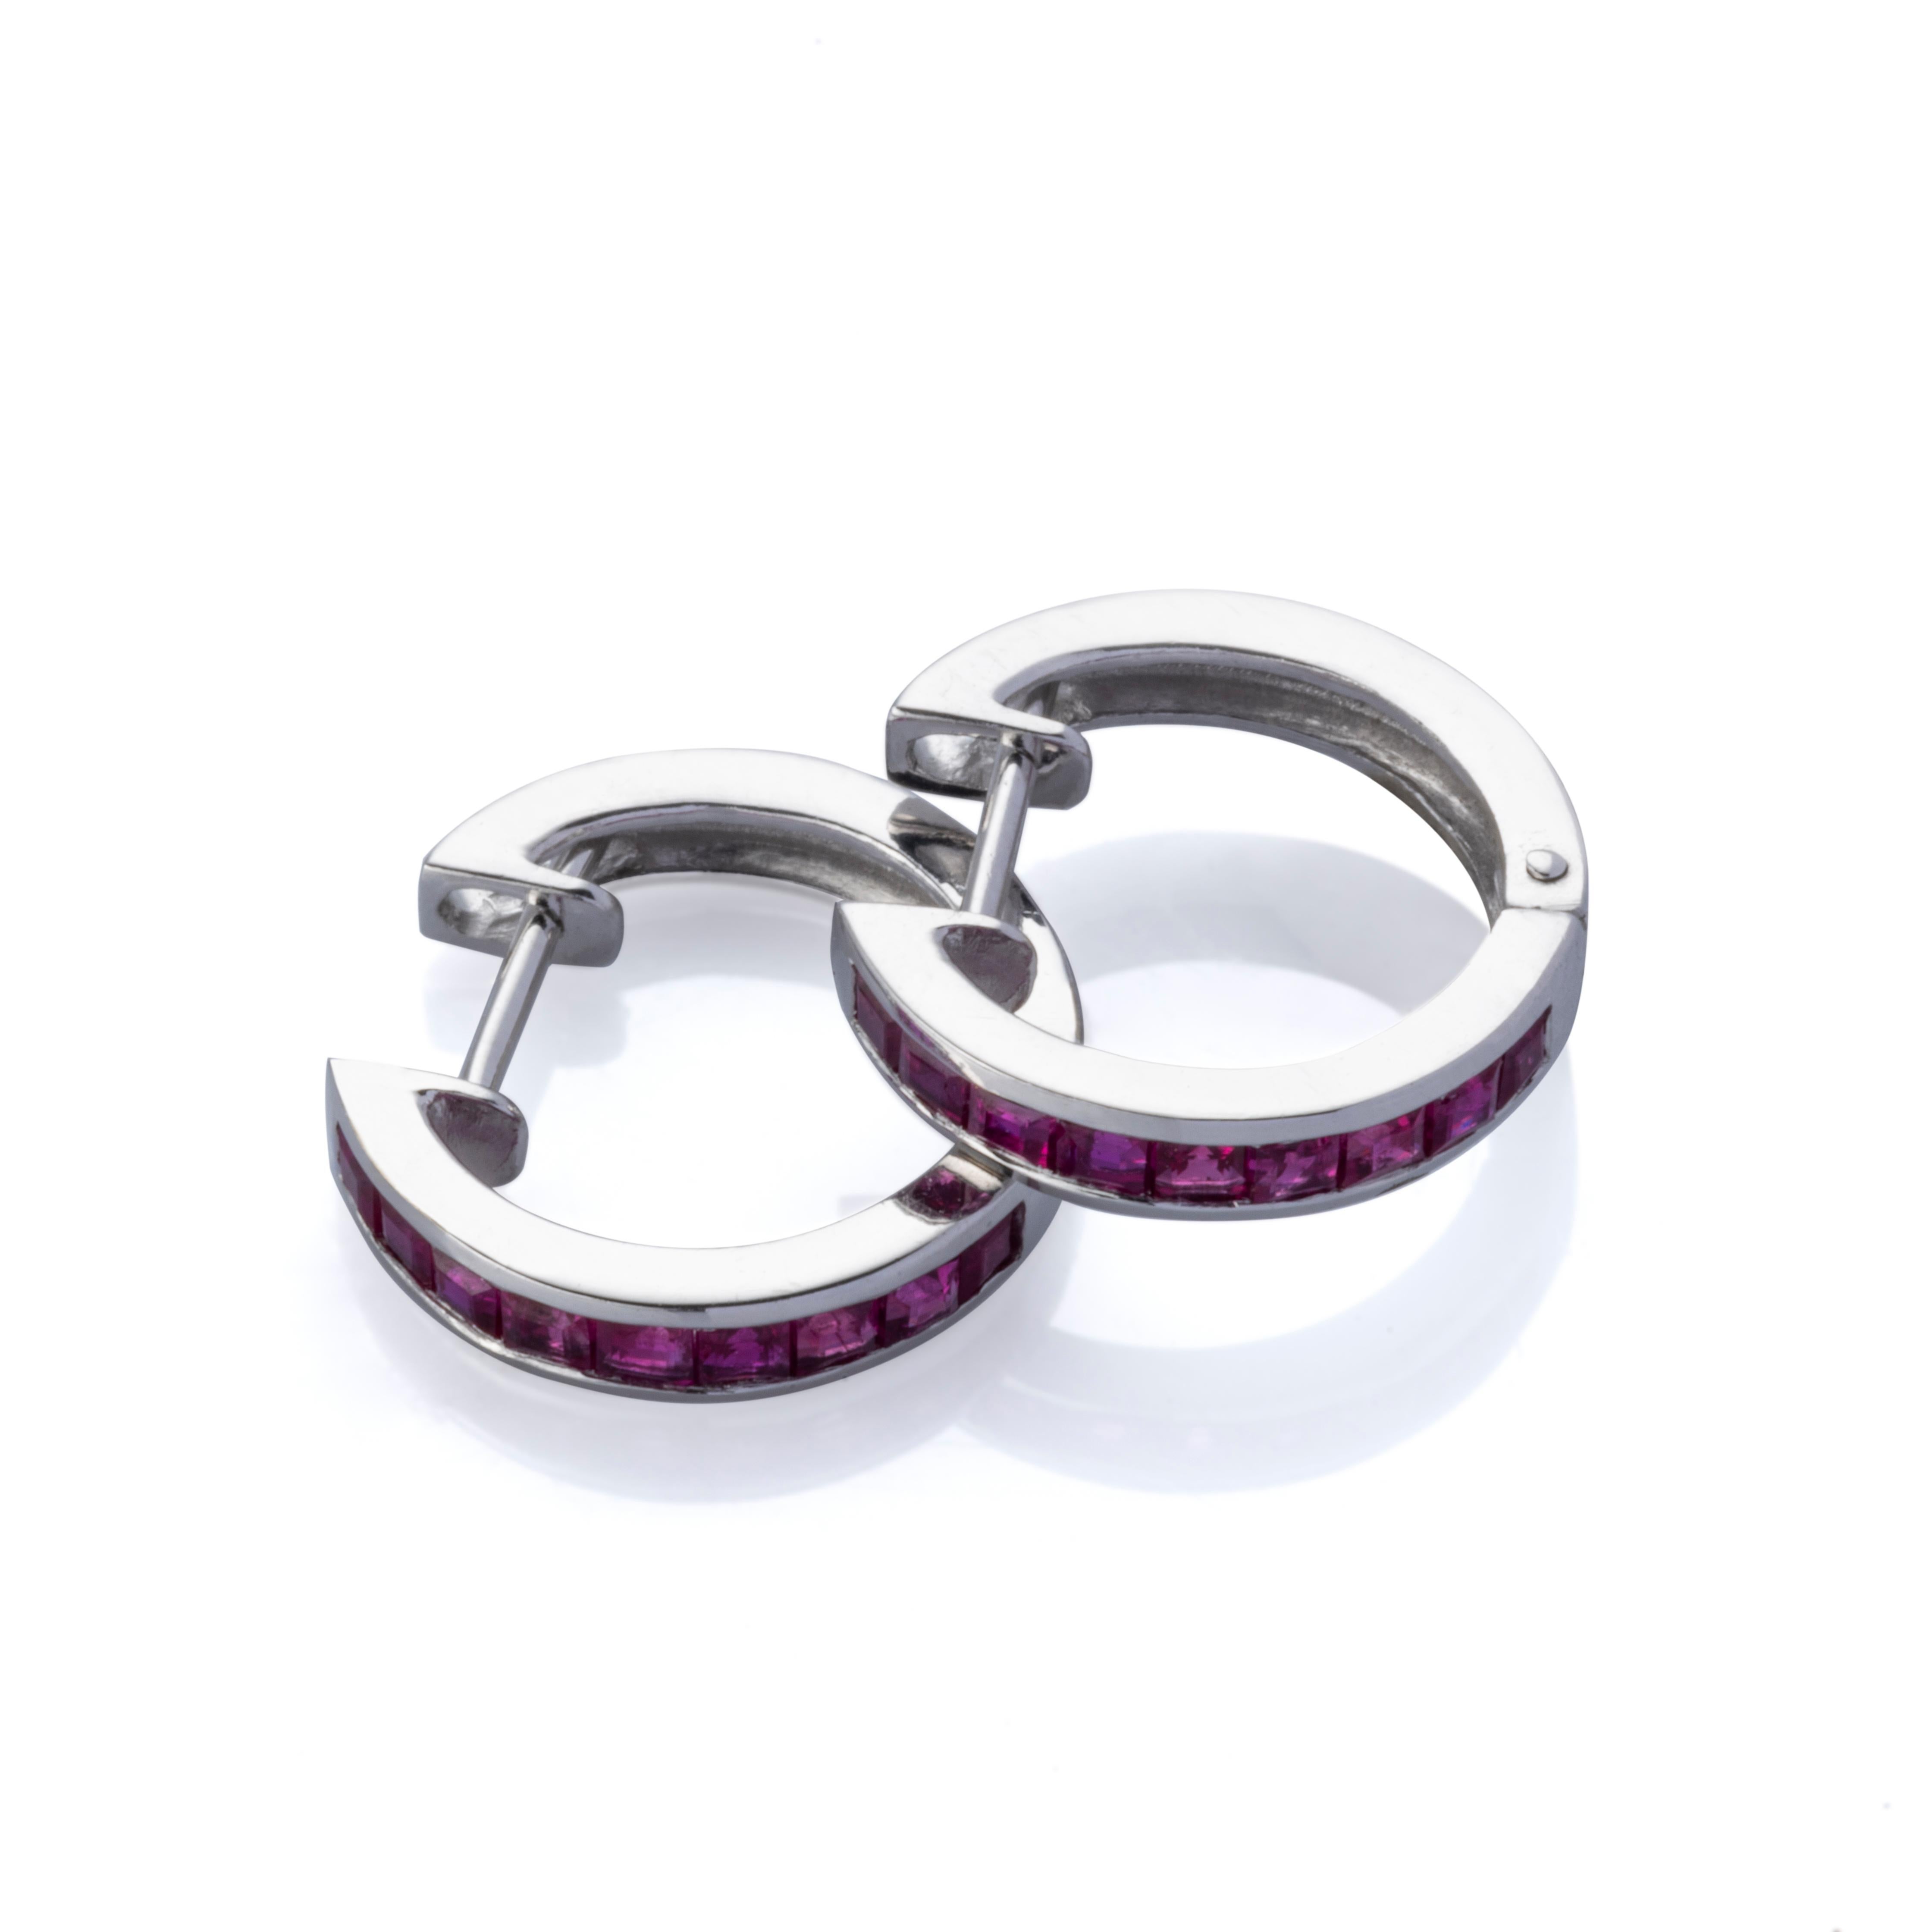 Starting only at 99.
Beautiful and unique earrings made in the early 2000s and has never been worn. The earrings have the unique shape of a hoop omega and is intricately designed. There are 18 squared pinkish red rubies in total and therefore 9 for